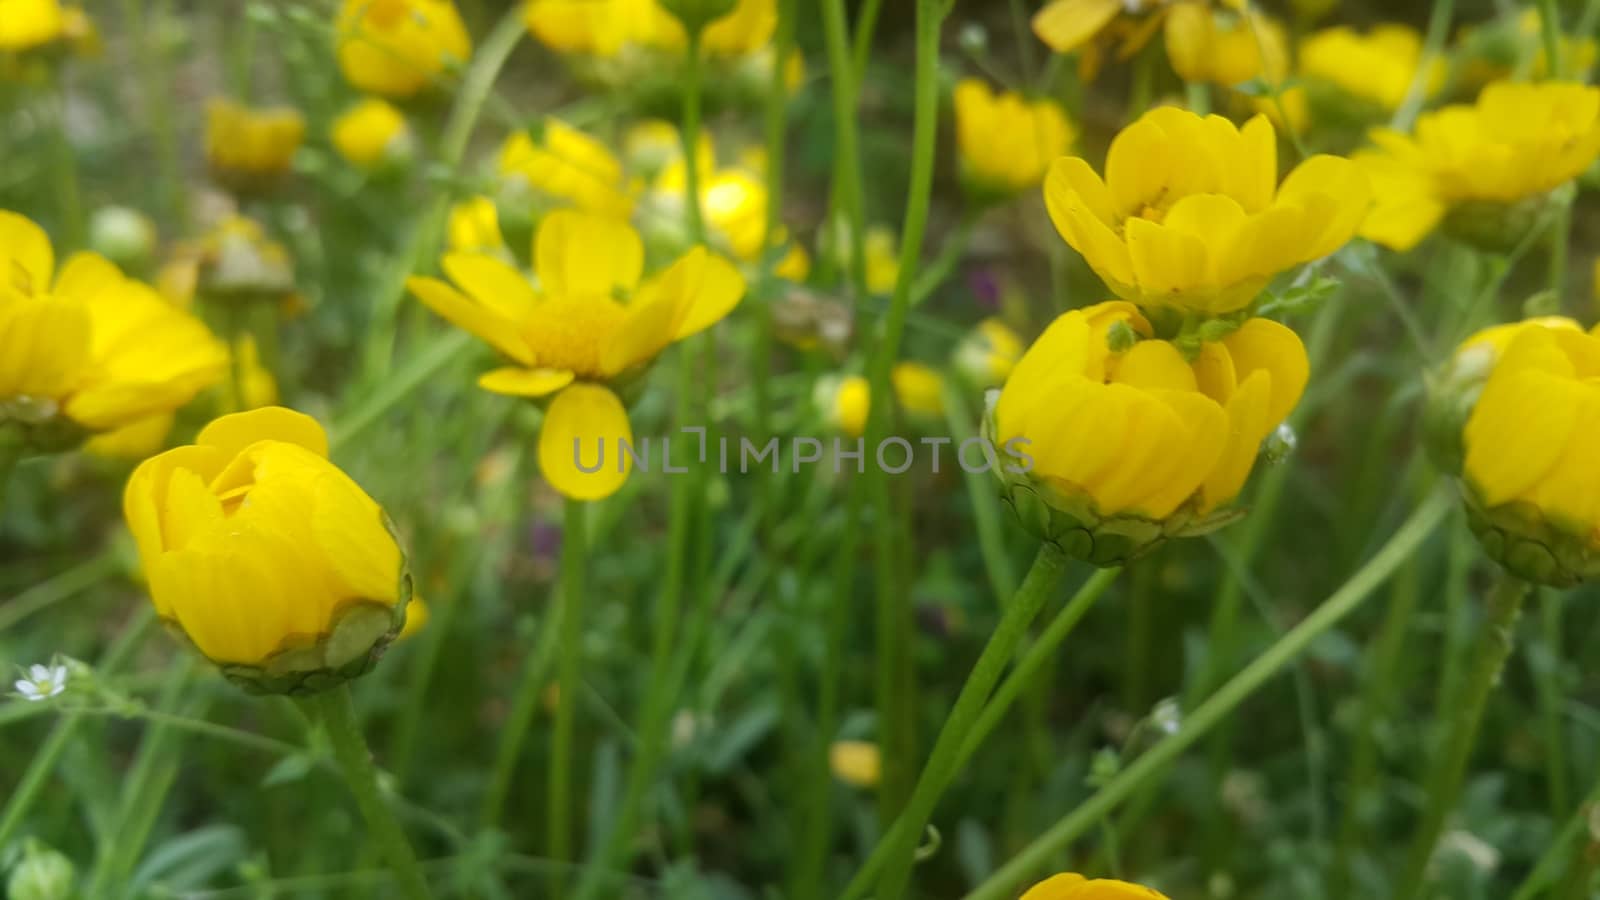 Closeup view of lovely yellow flower against a green leaves background by Photochowk